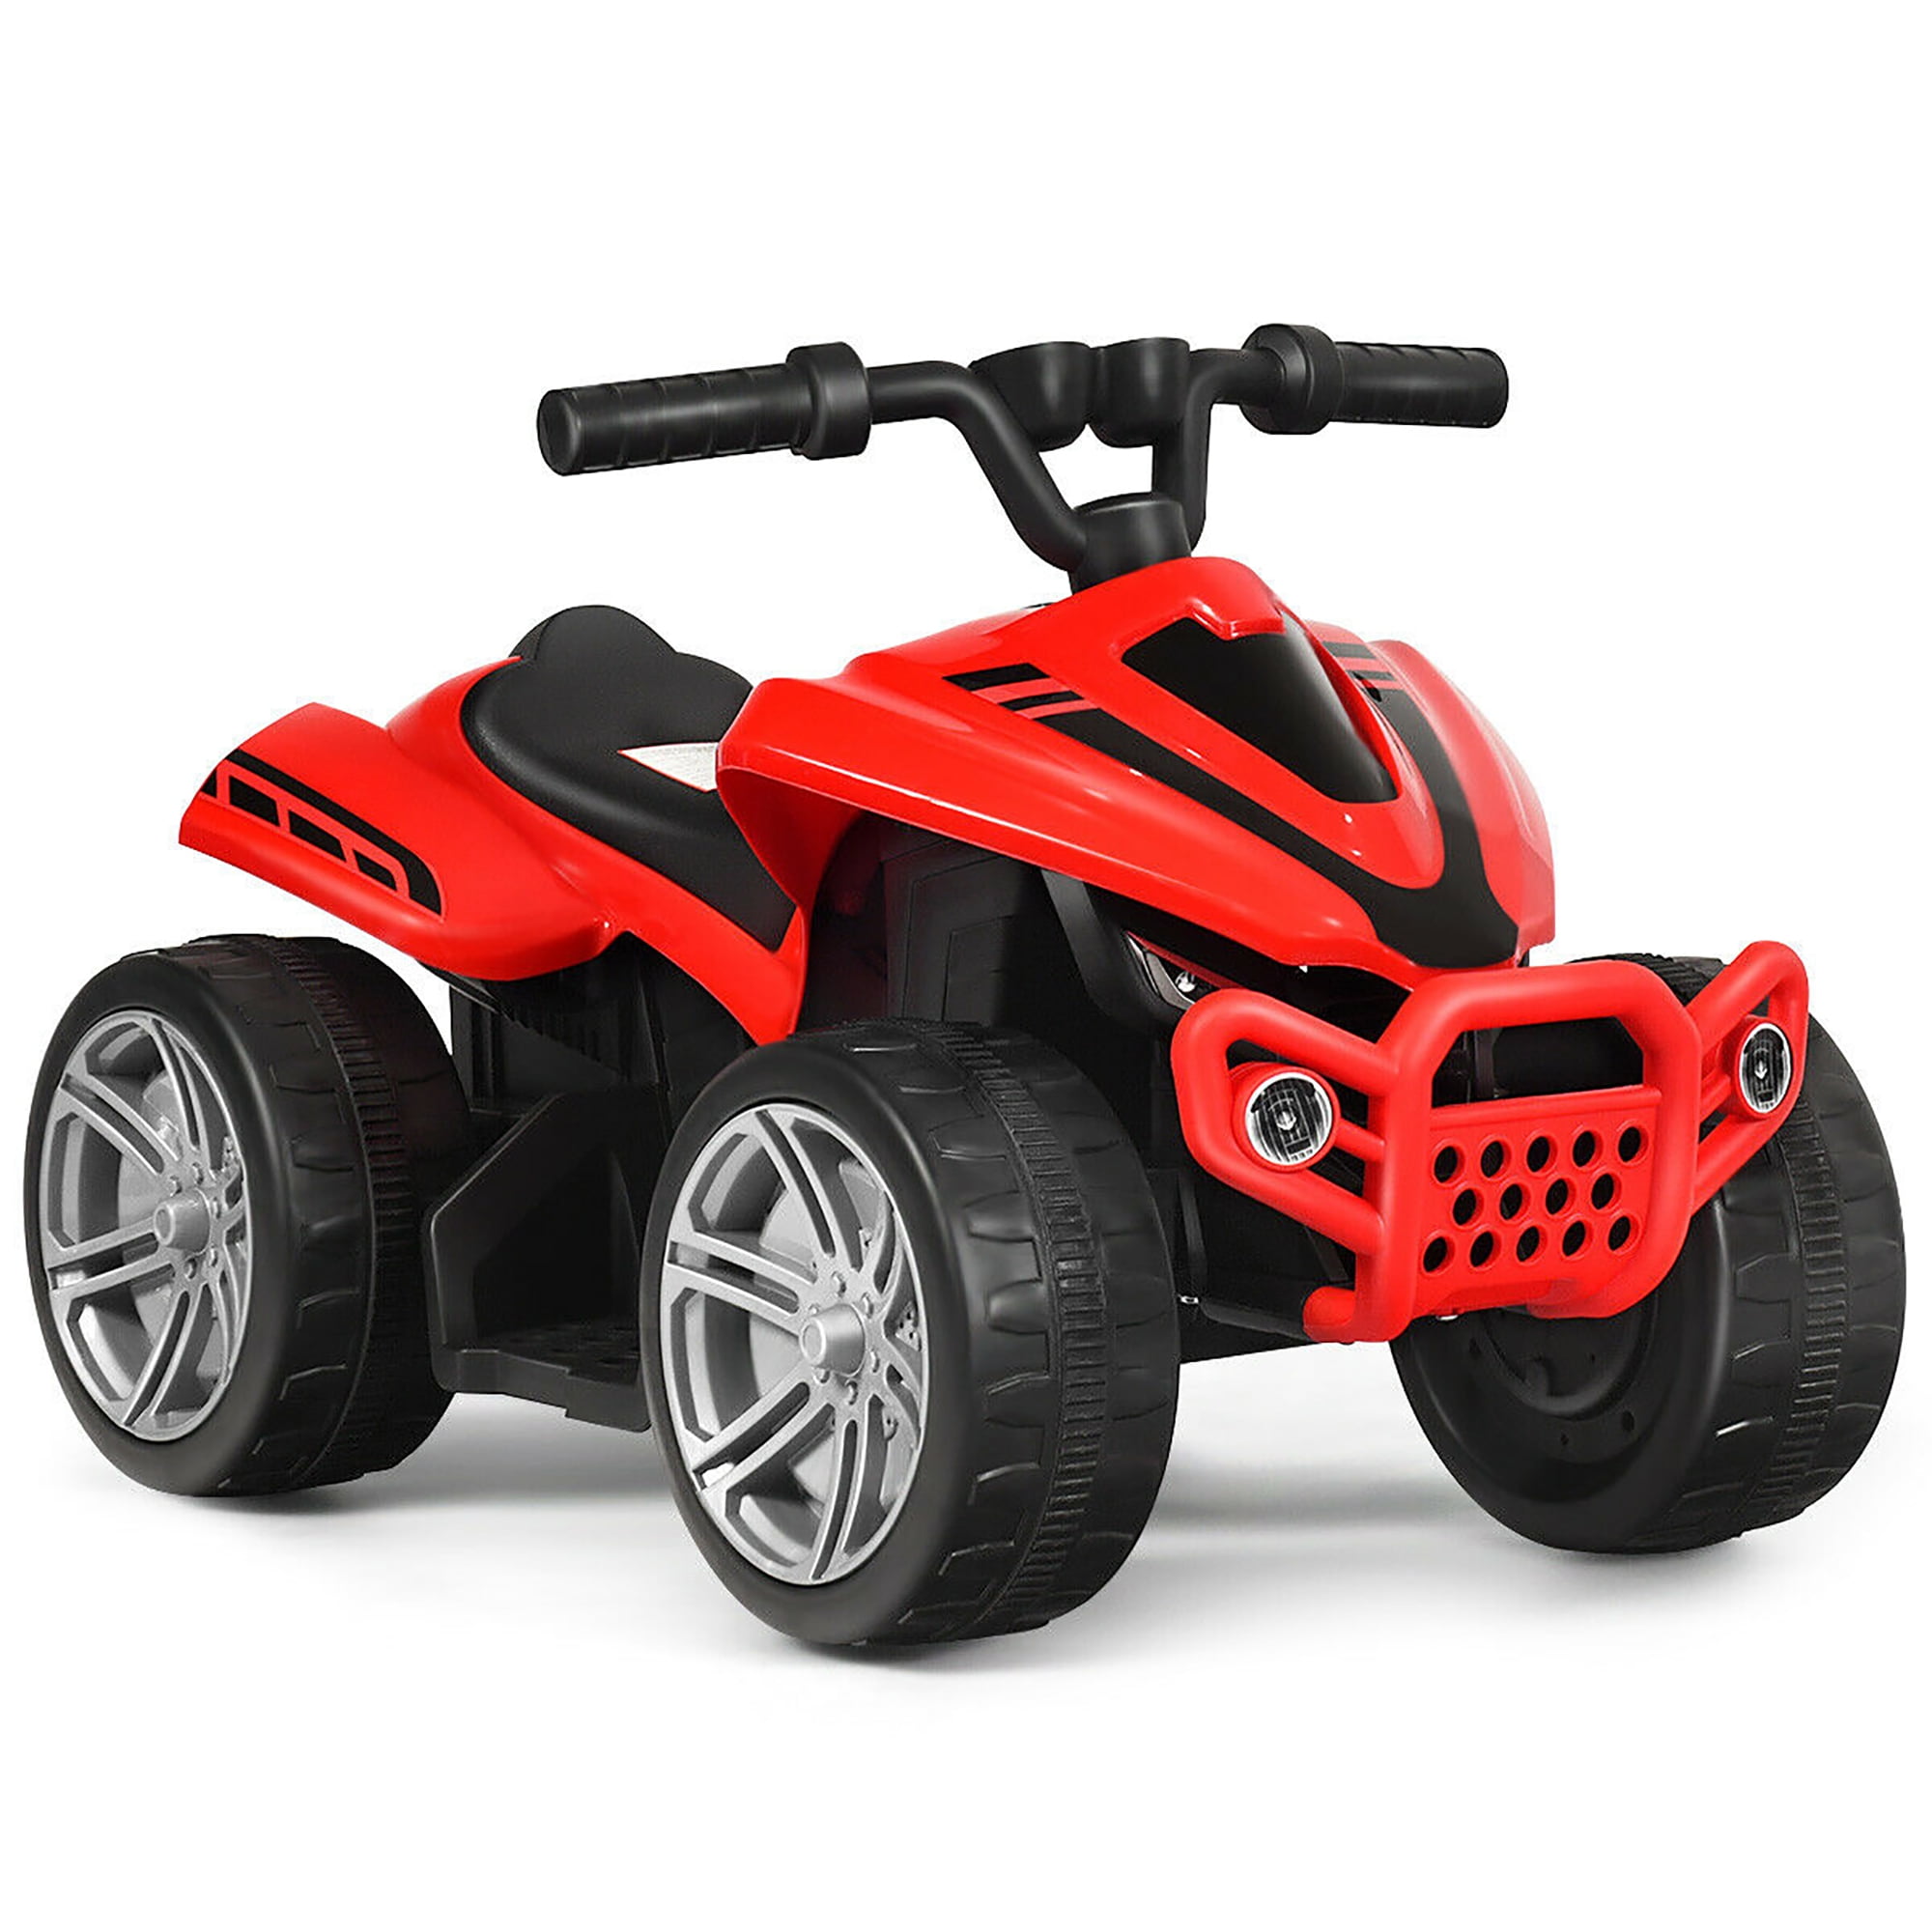 Kiddie Quad Red 6V Electric Ride On ATV For Toddler Kid Car Truck Toy 